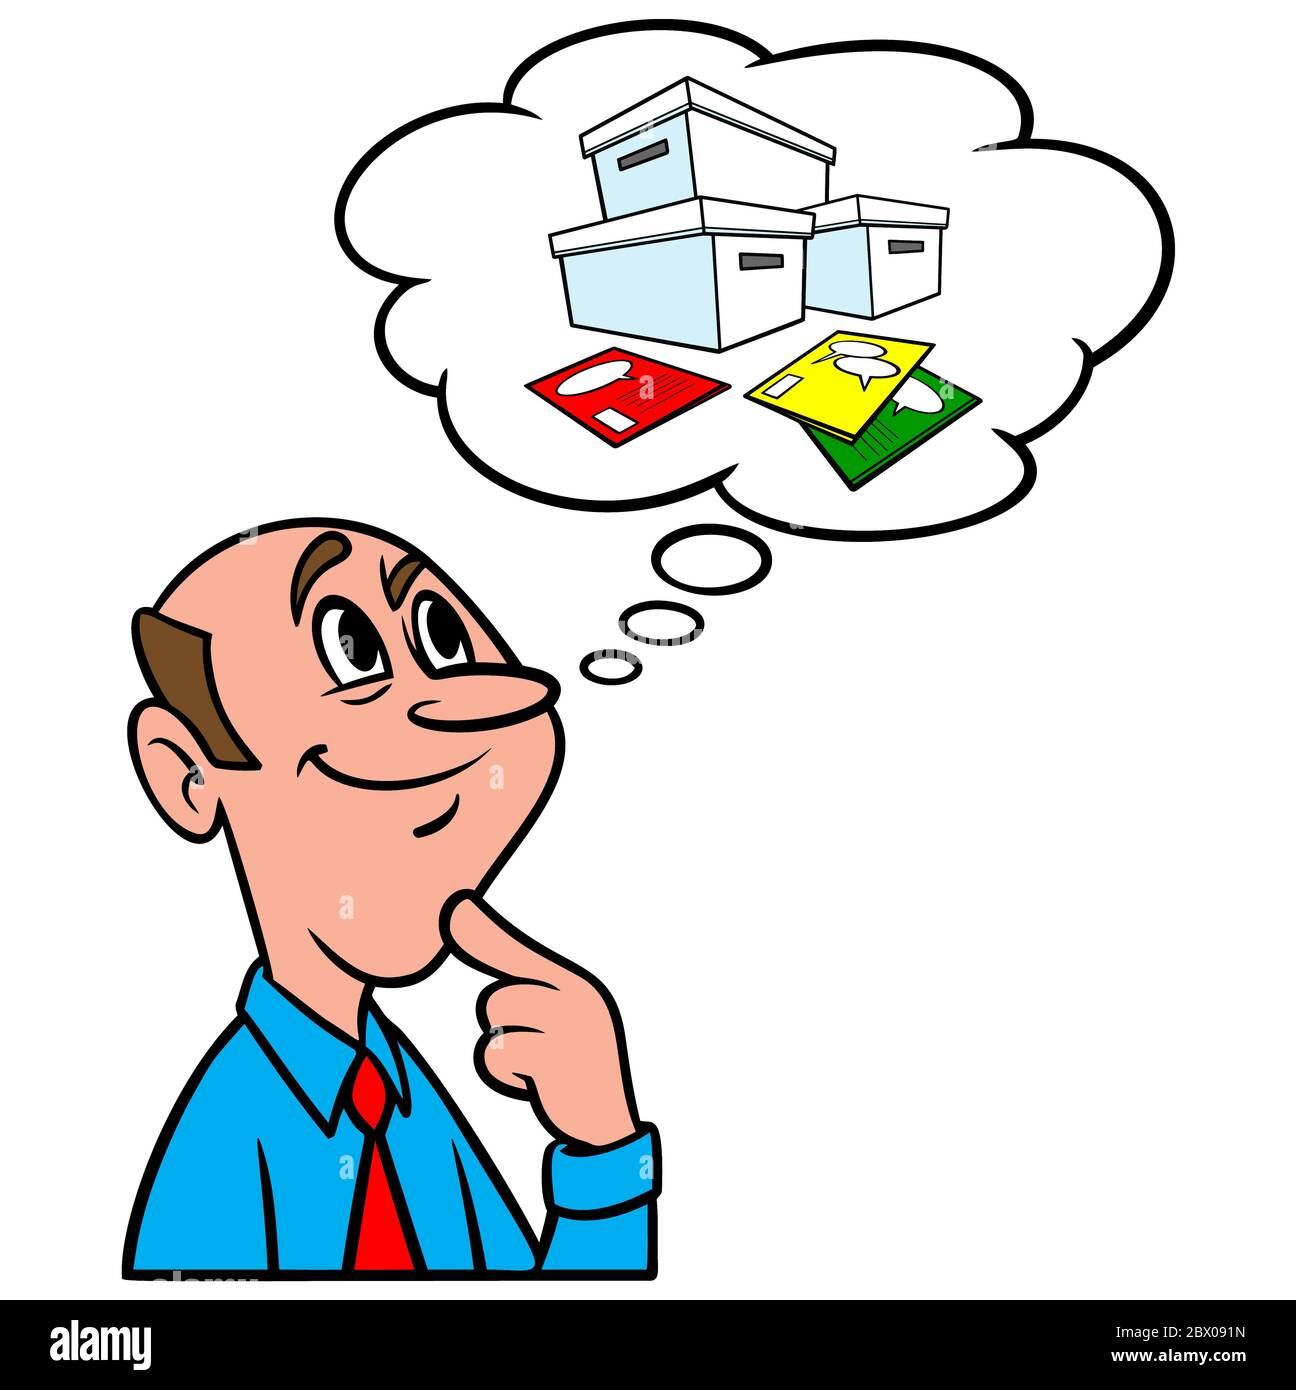 Thinking About Comic Books- An Illustration of a person Thinking About Comic Books. Stock Vector